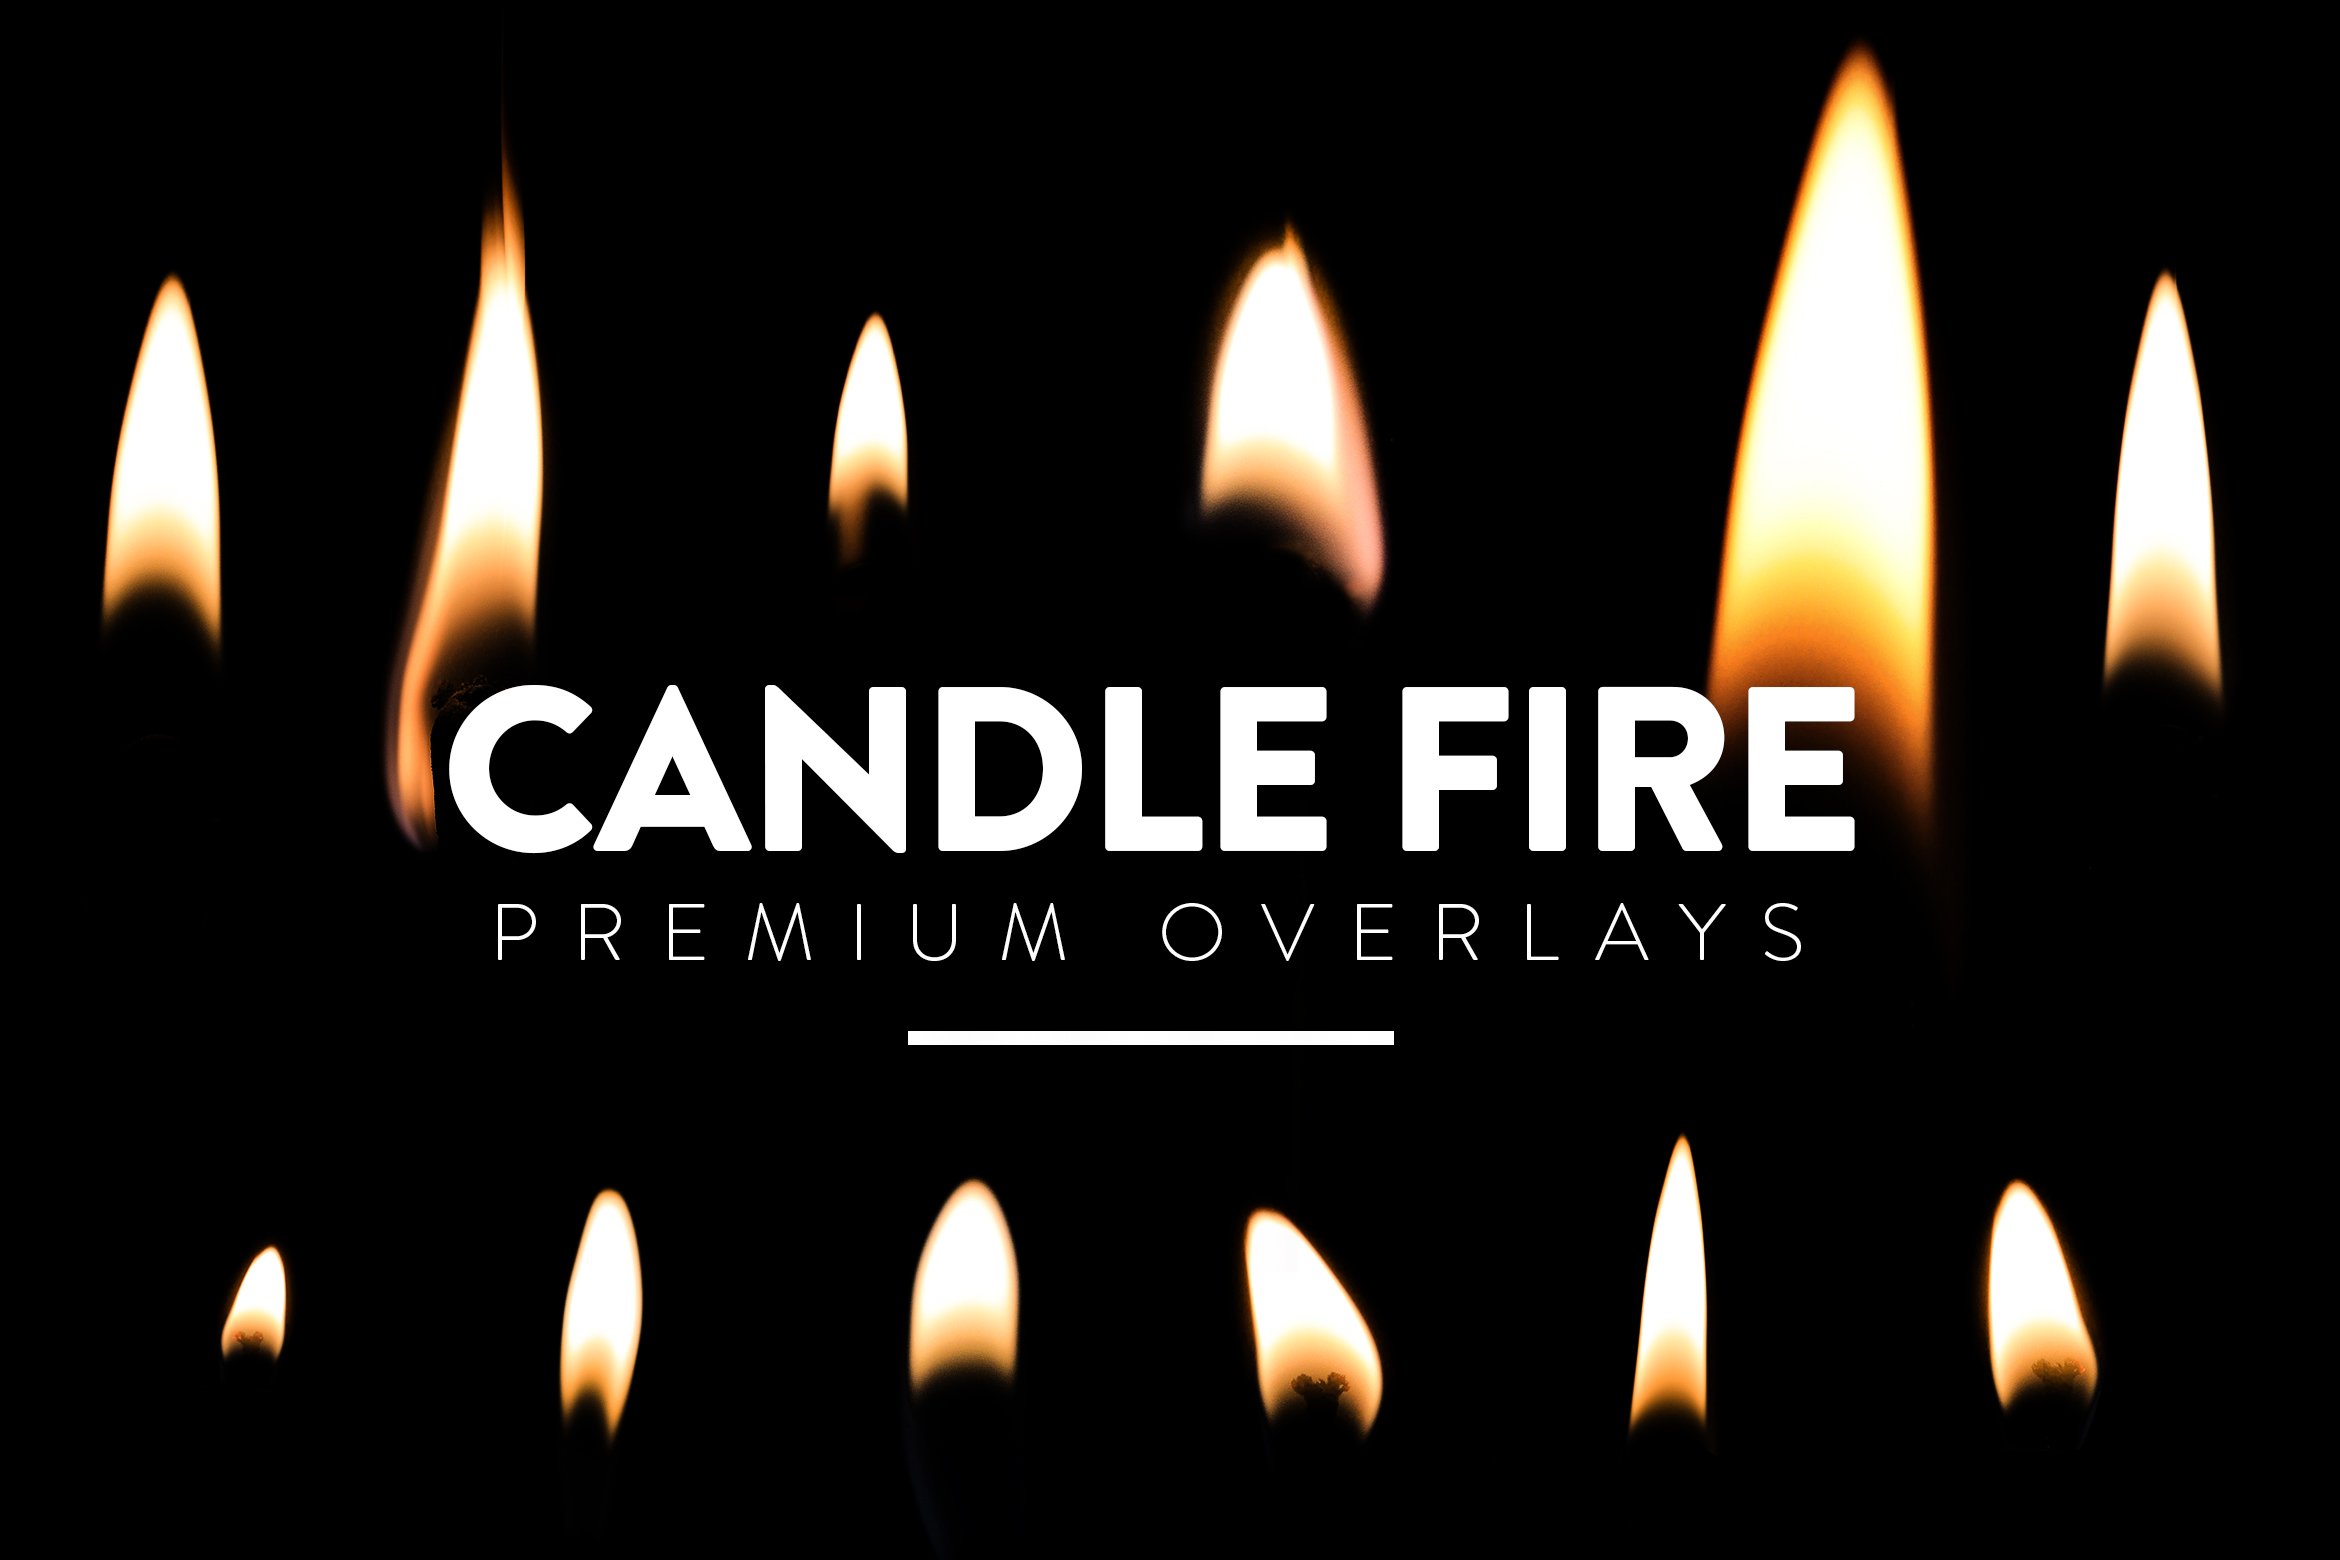 30 Candle Flames Overlays cover image.